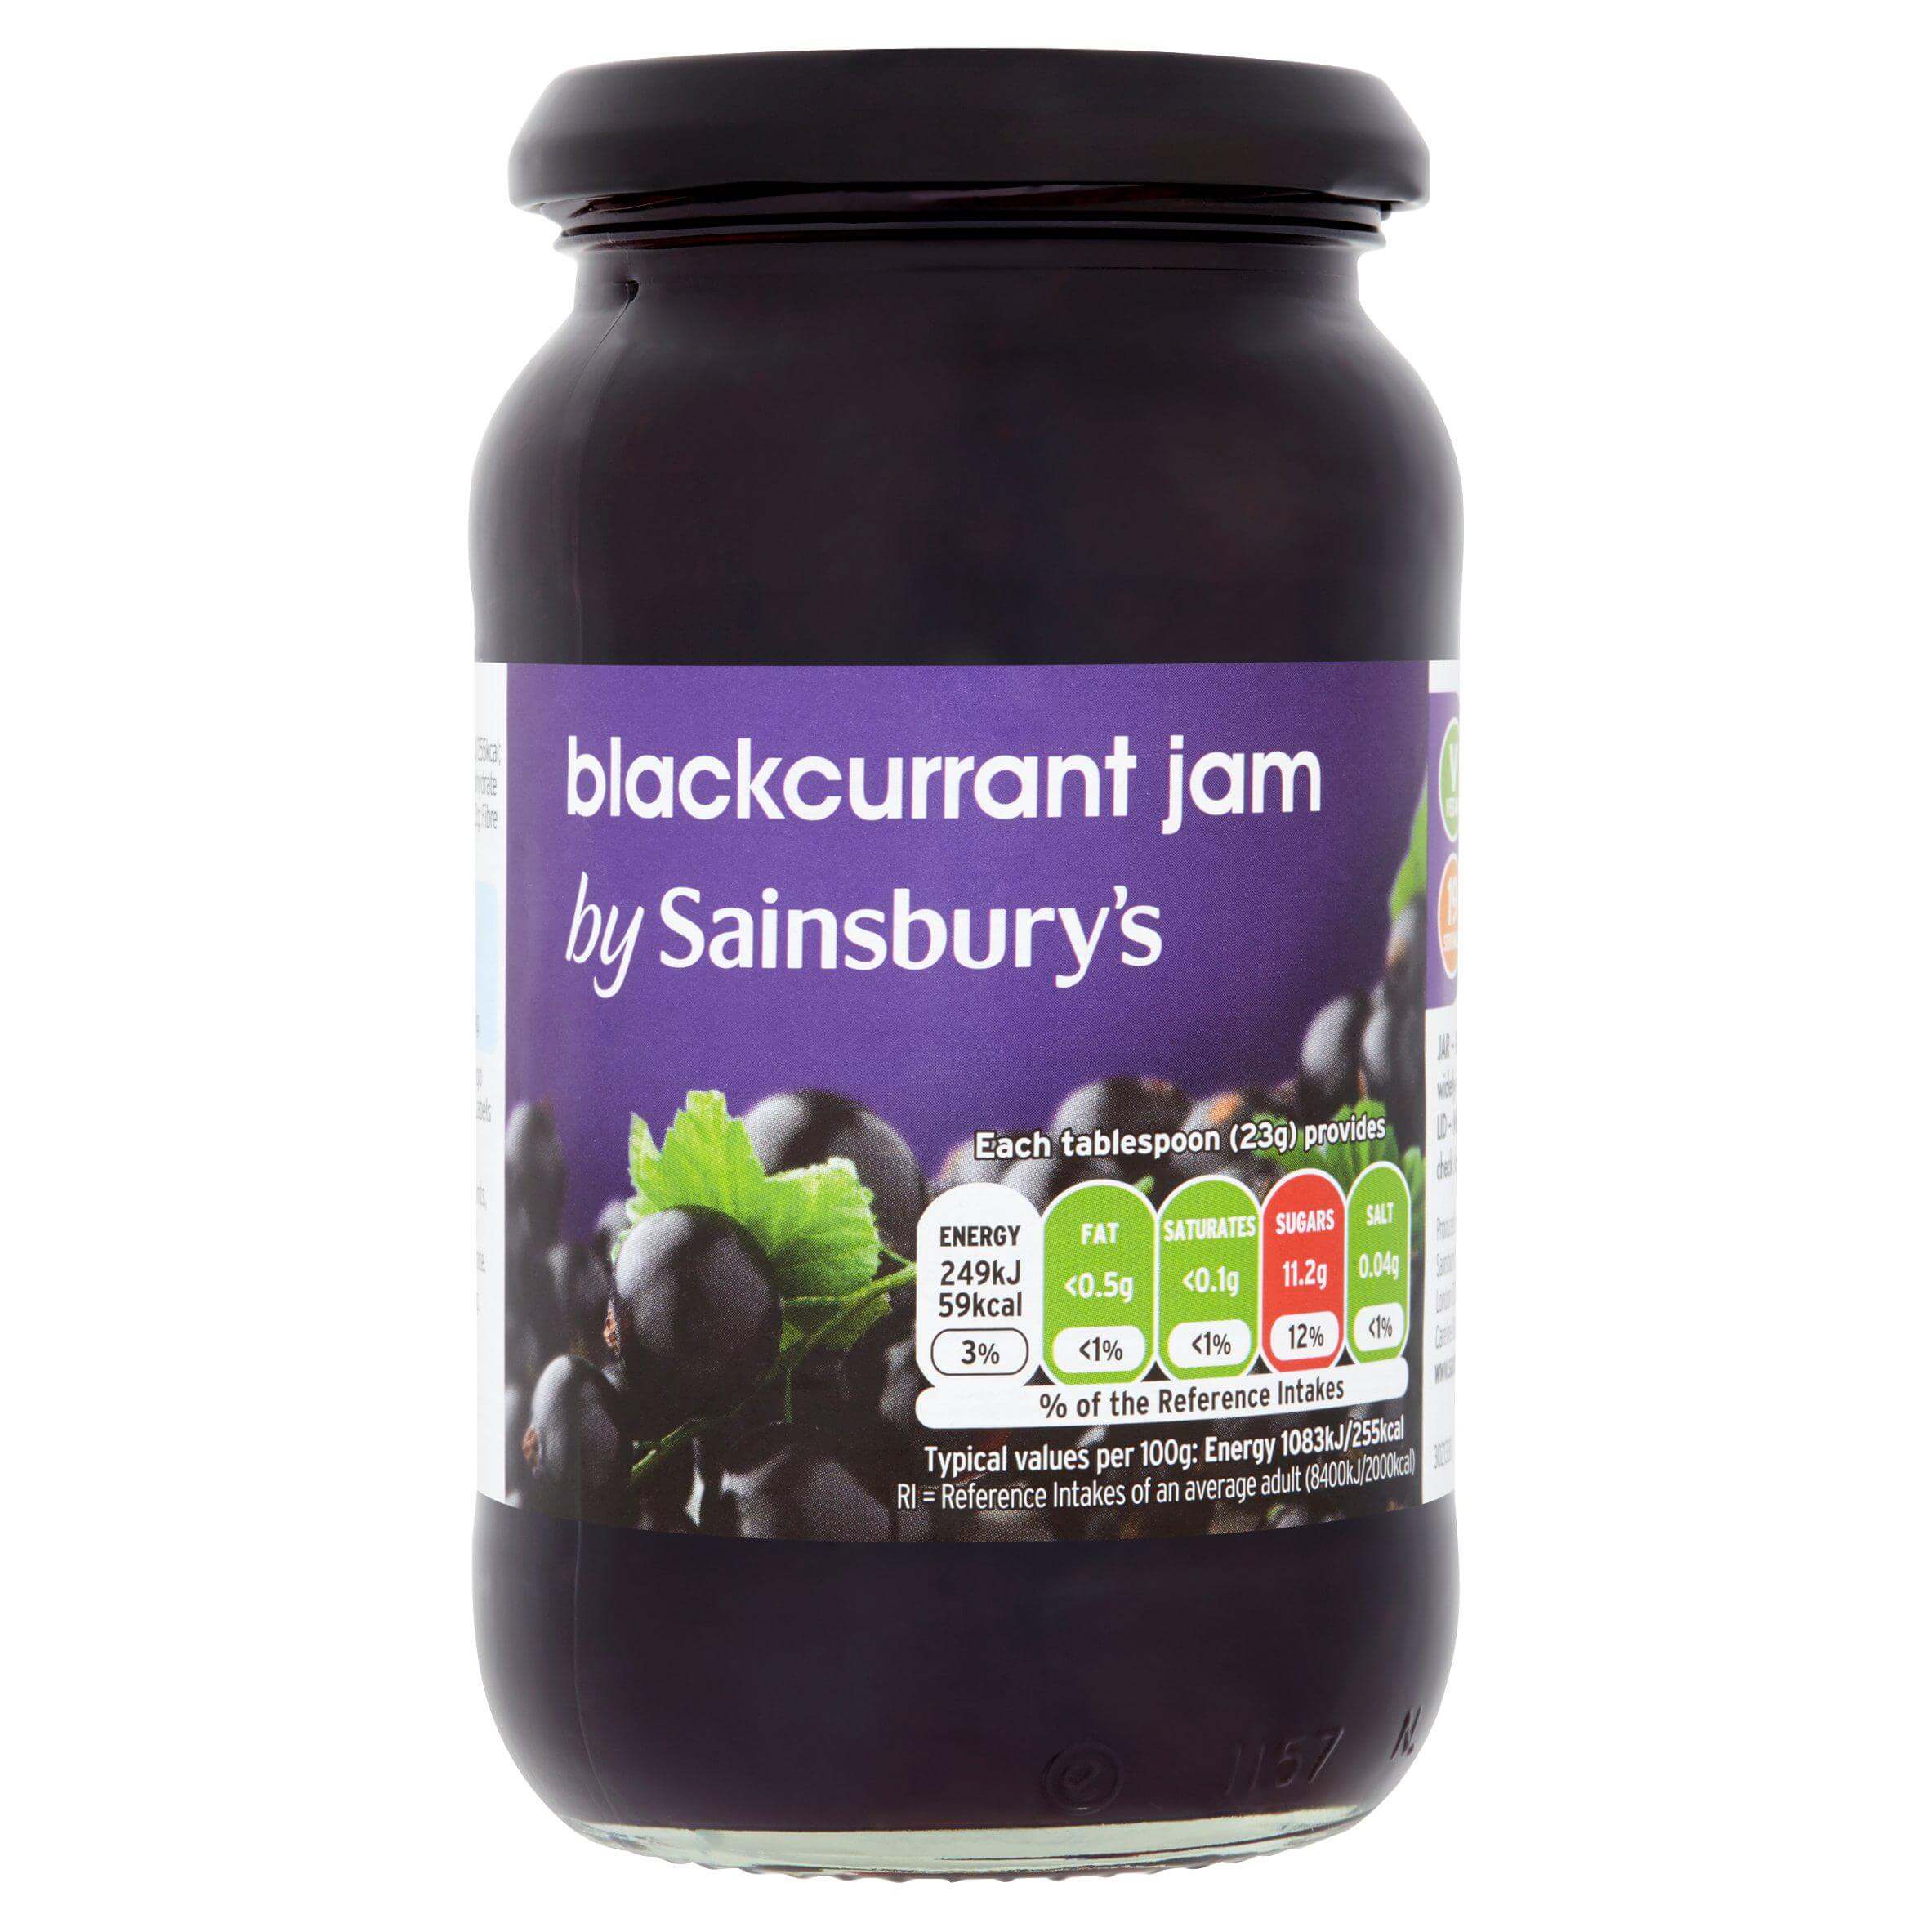 Image of Blackcurrant Jam made in the UK by Sainsbury's. Buying this product supports a UK business, jobs and the local community